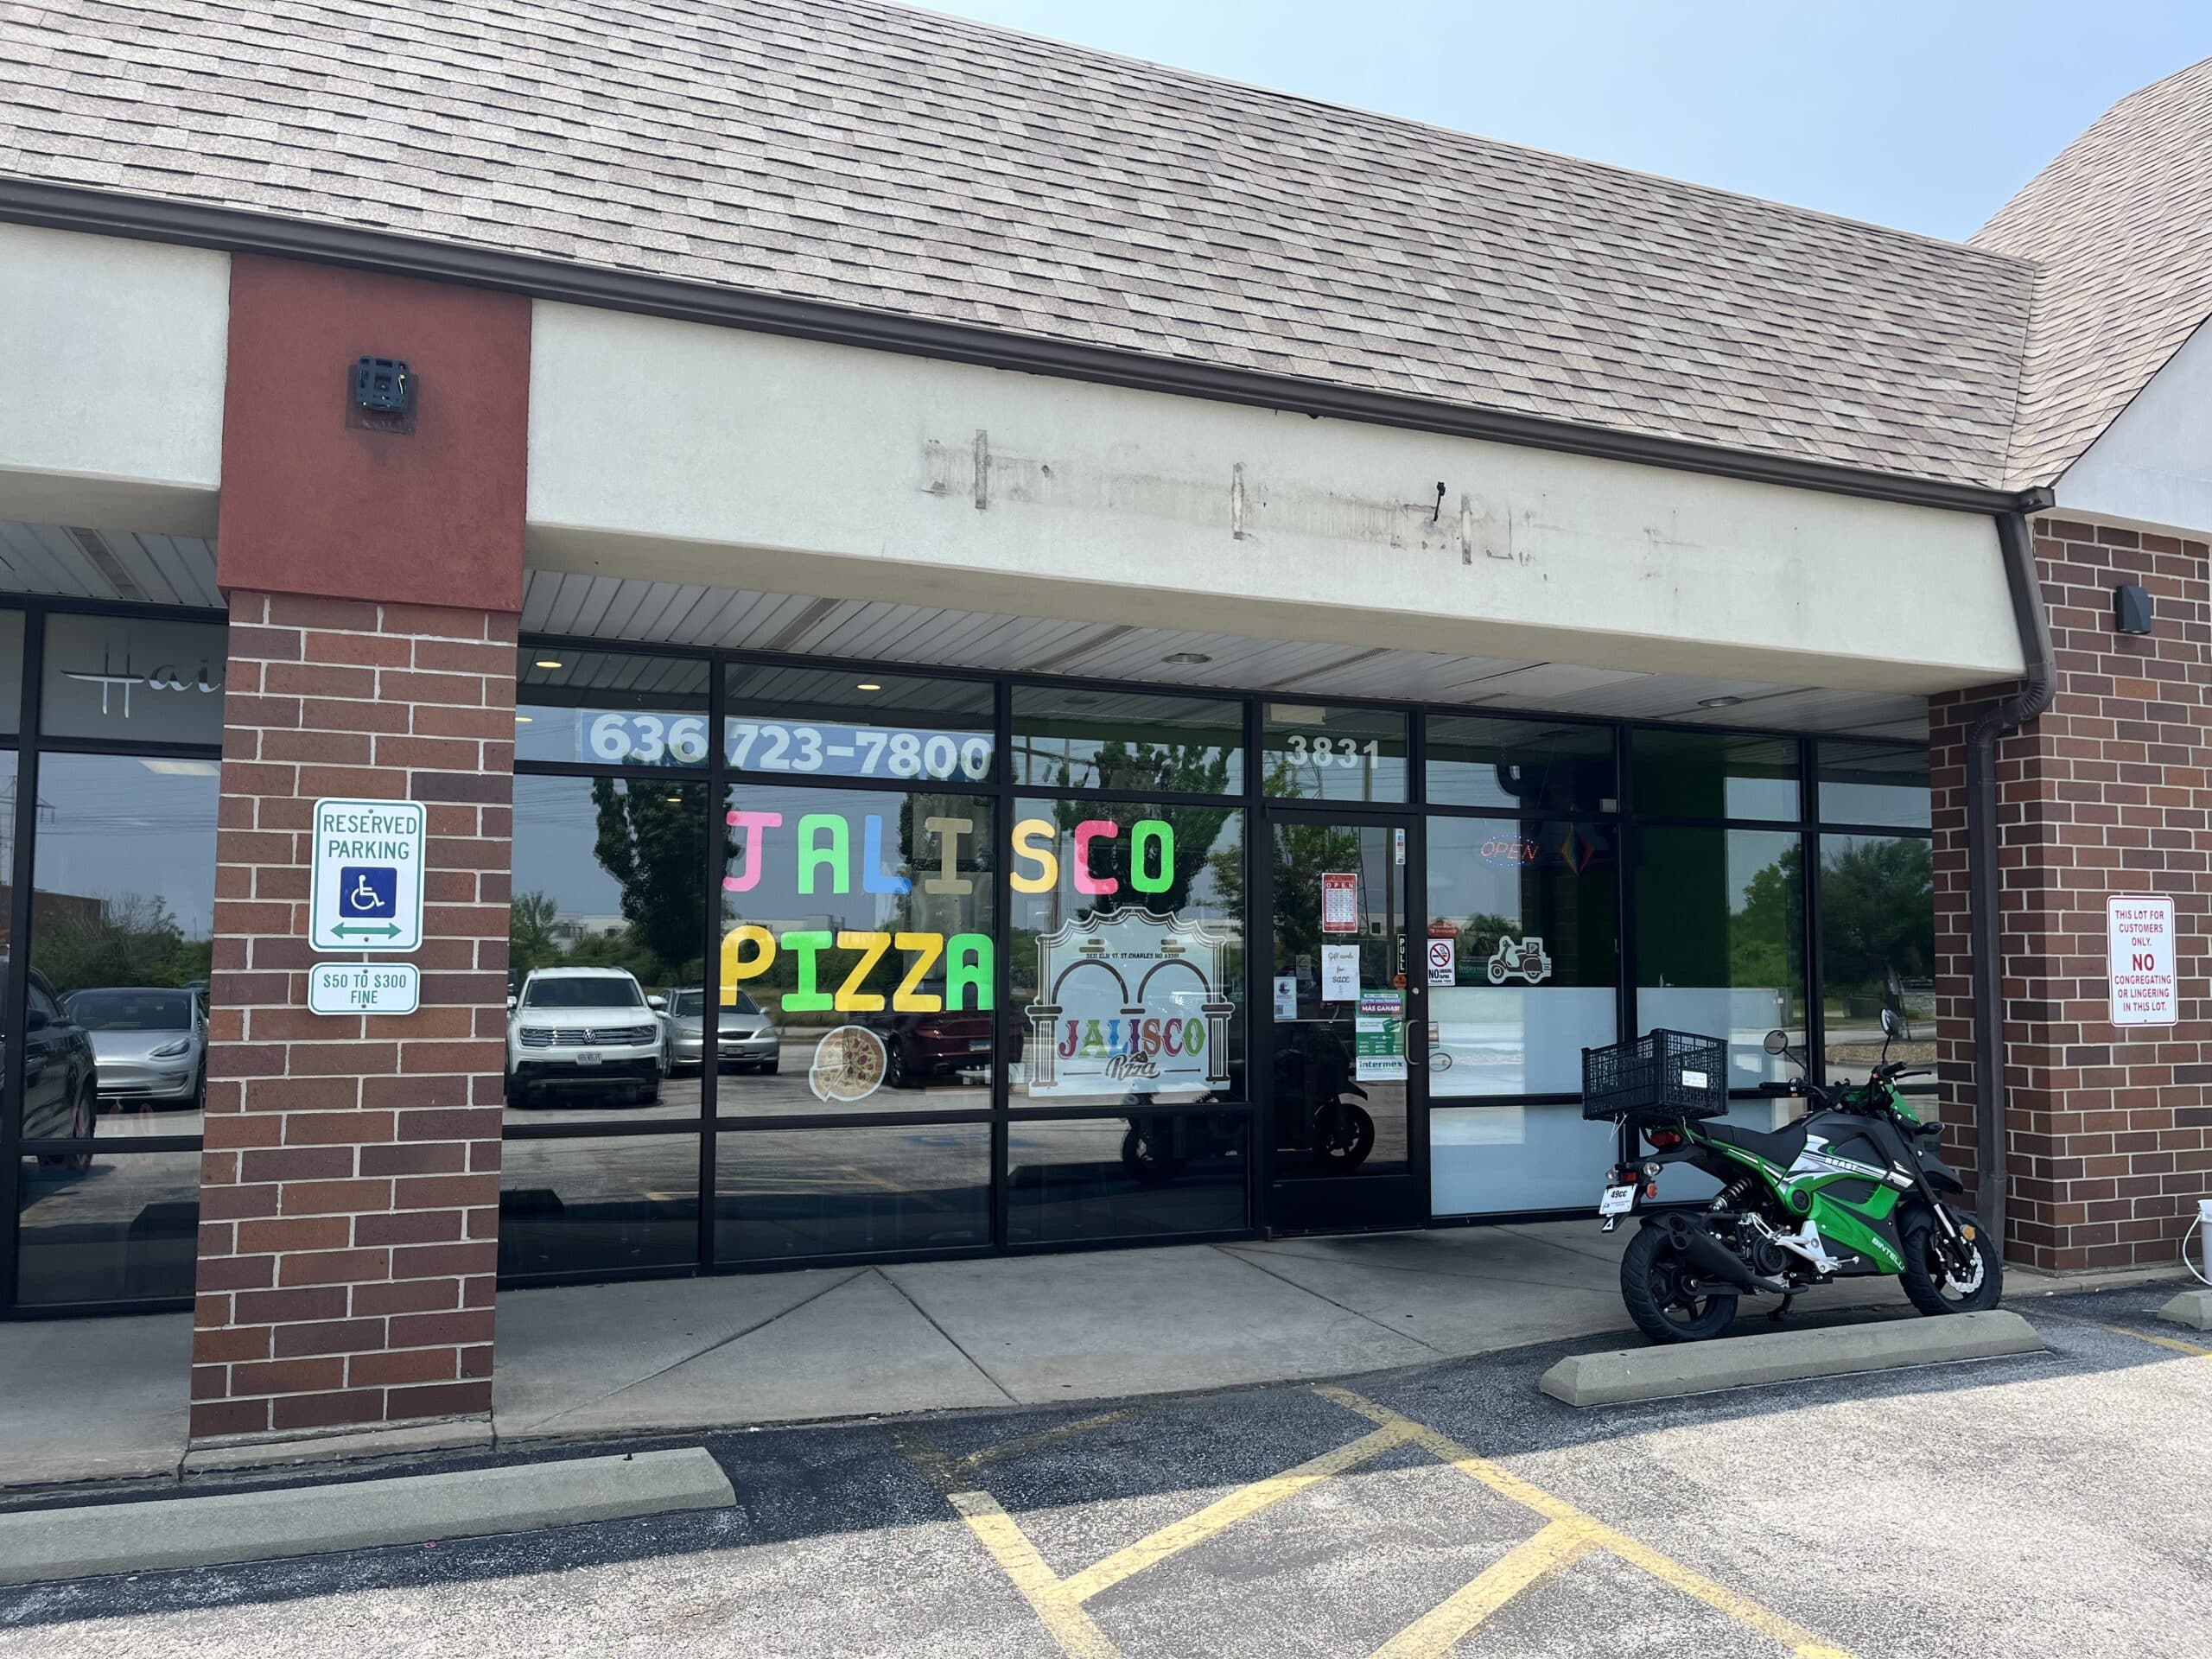 Jalisco Pizza - St. Charles, MO - Restaurant Review